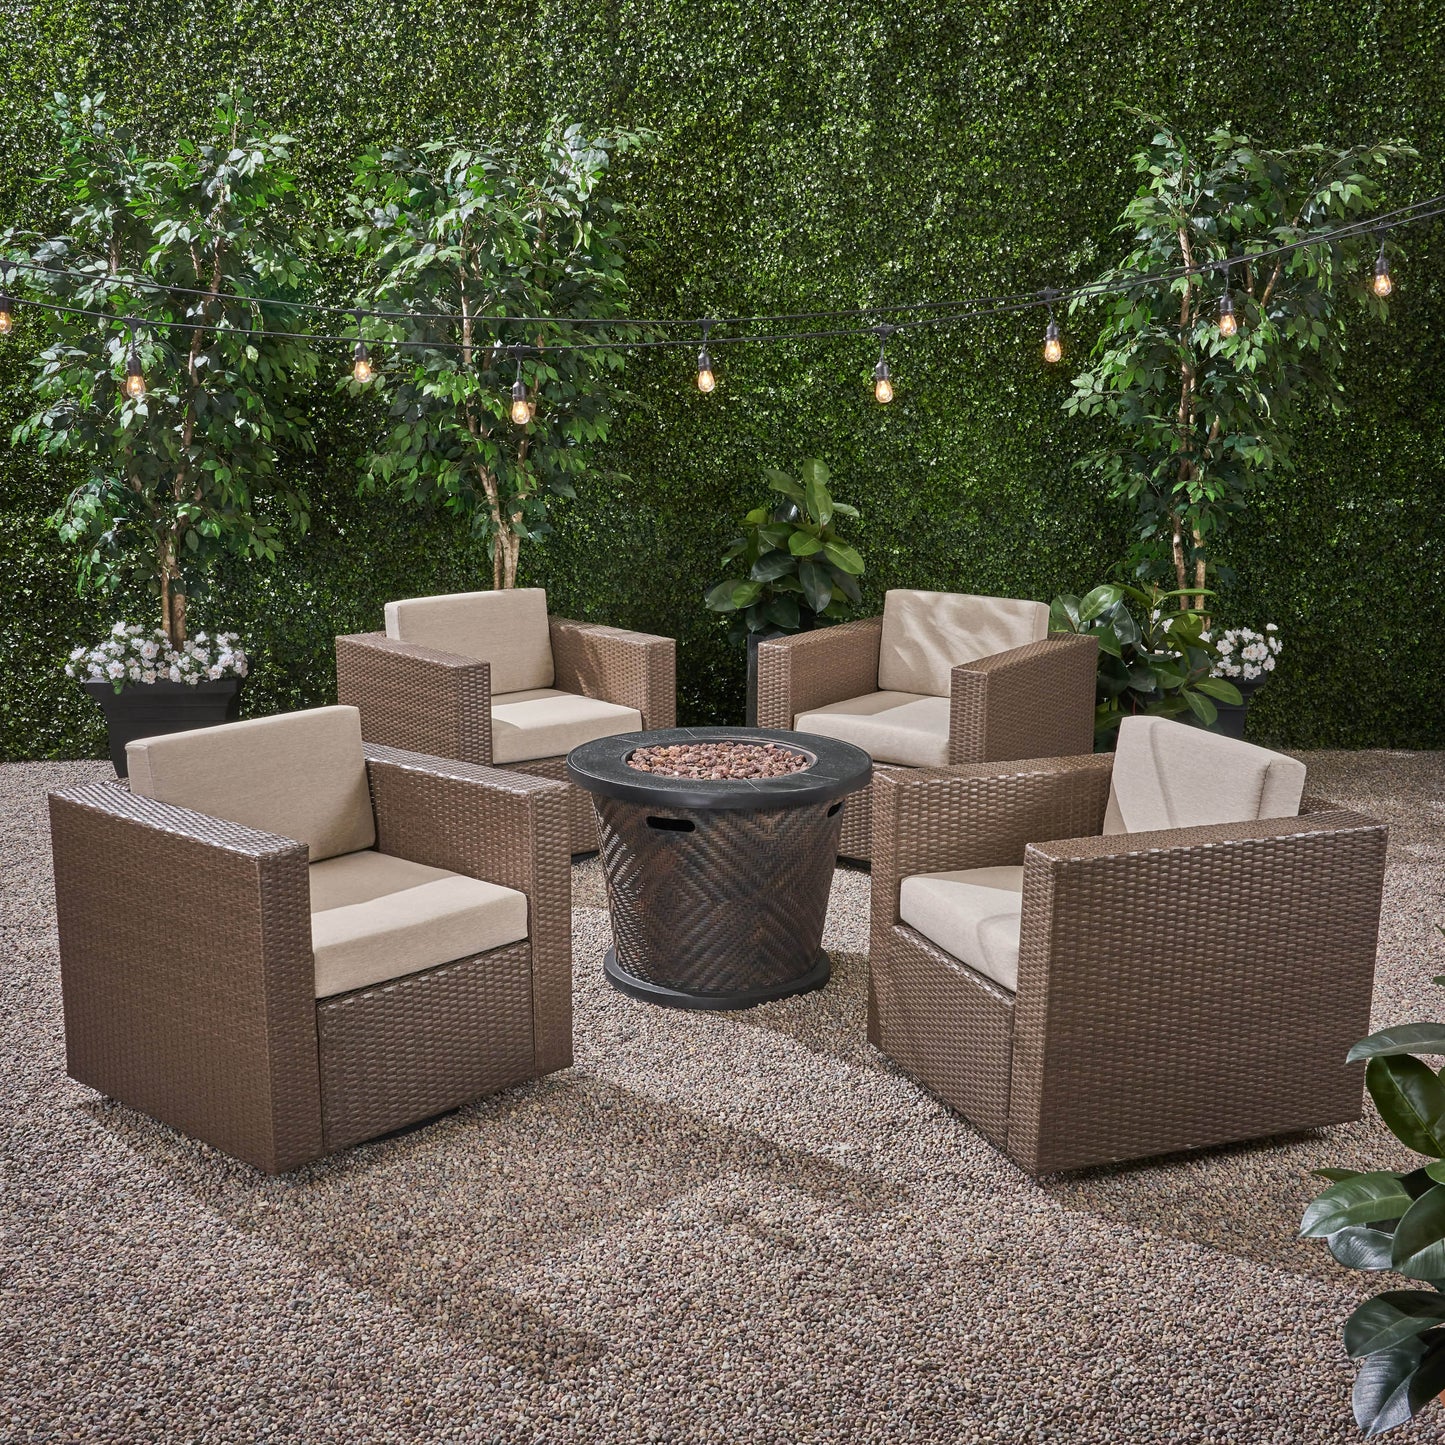 Liyam Outdoor 4 Piece Wicker Swivel Chair Set with Fire Pit, Brown and Brown